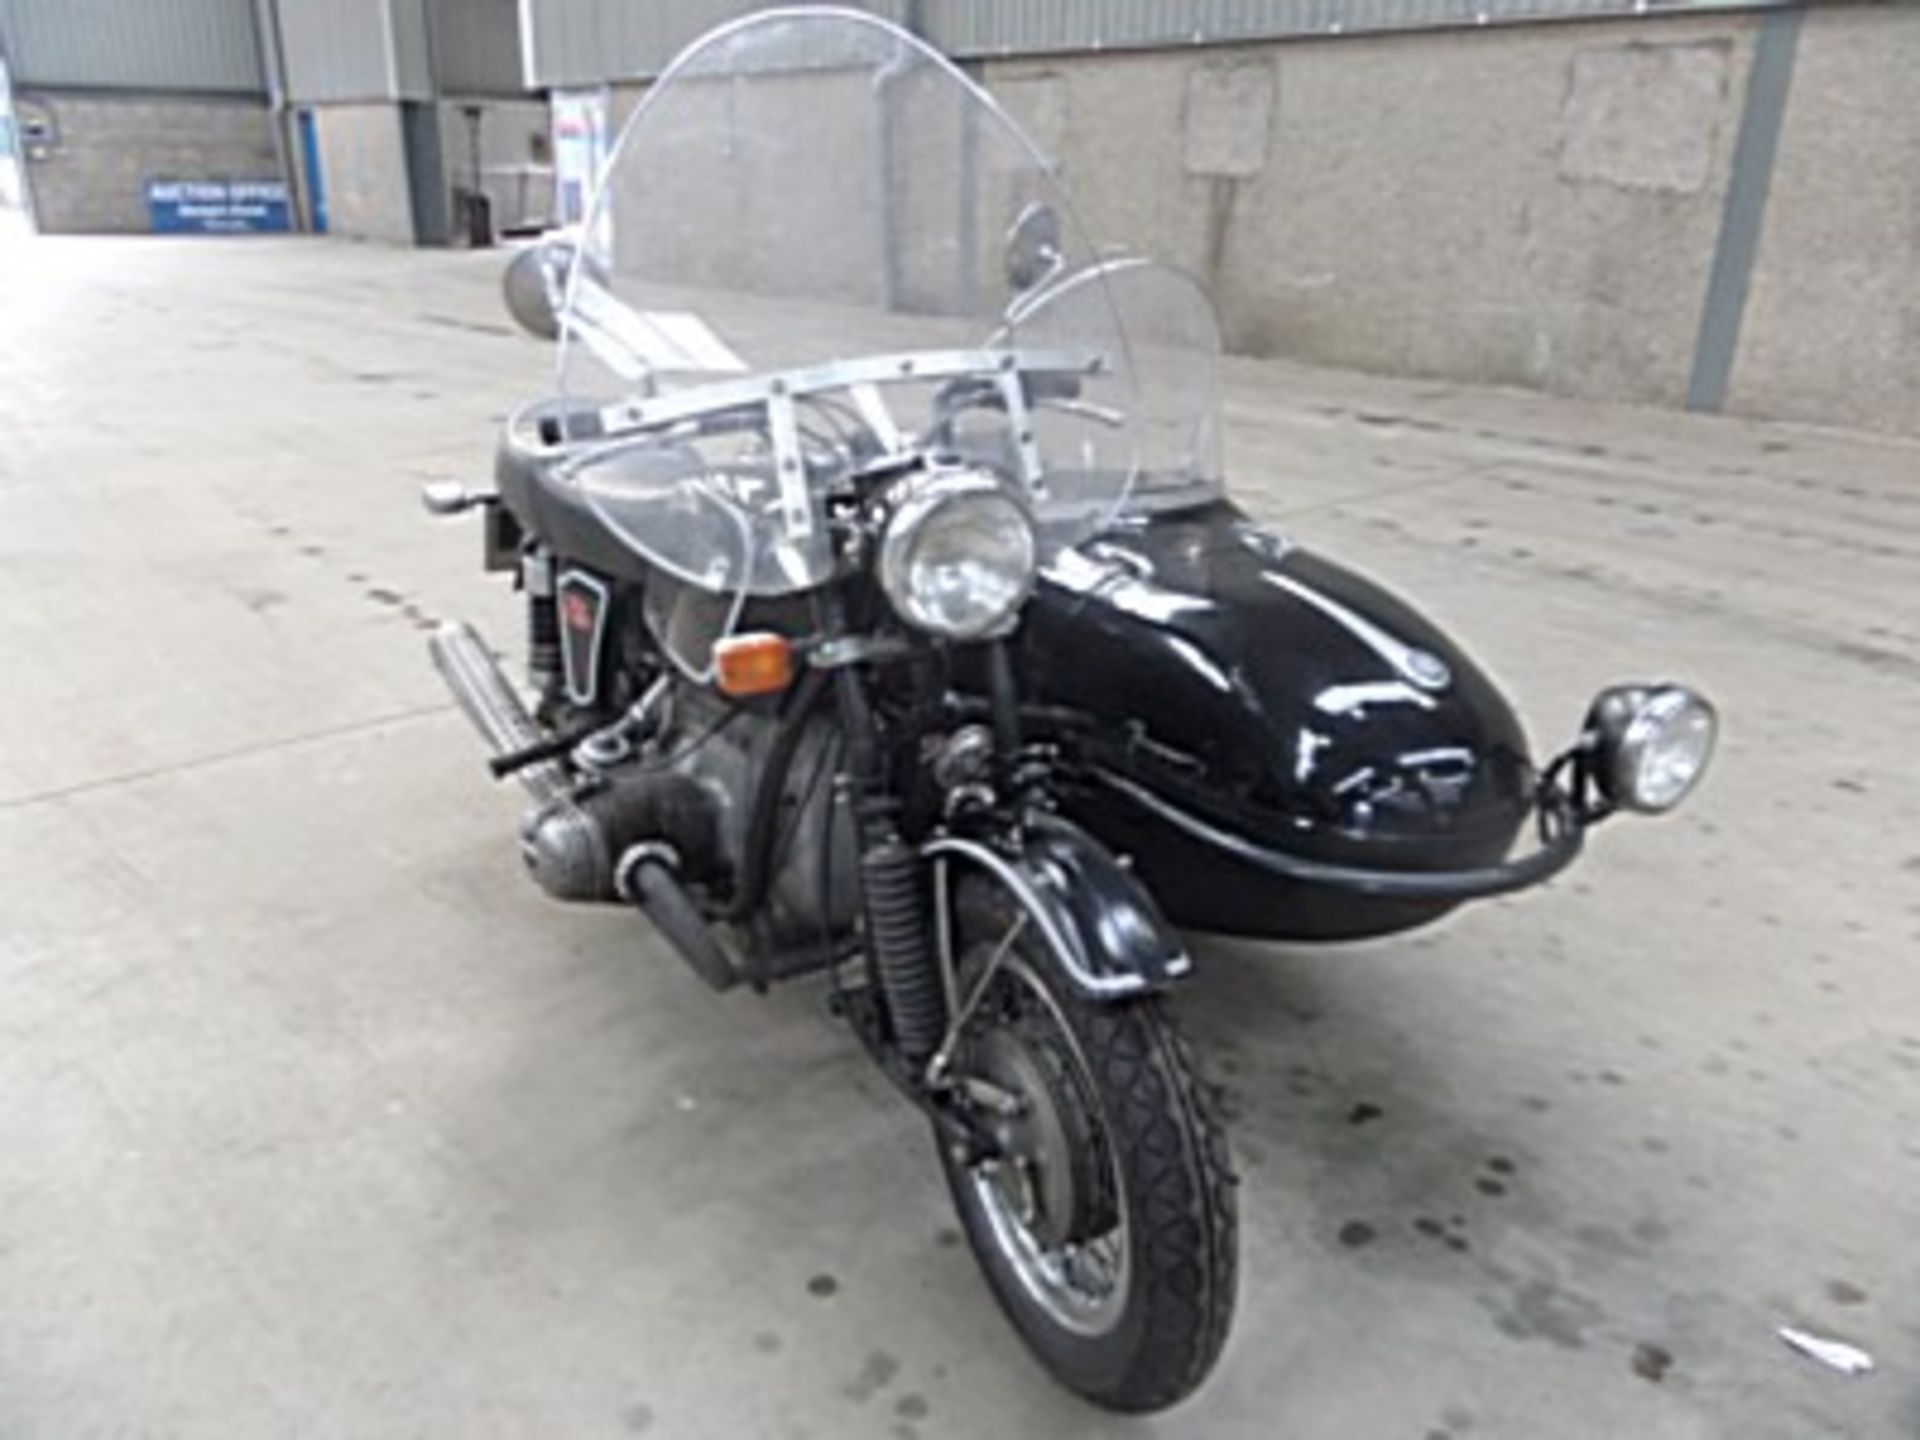 BMW, R75/5 COMBO - 745cc, Chassis number 4007988 - MOT tested until January 2017 ESTIMATE £3000 - £ - Image 2 of 11